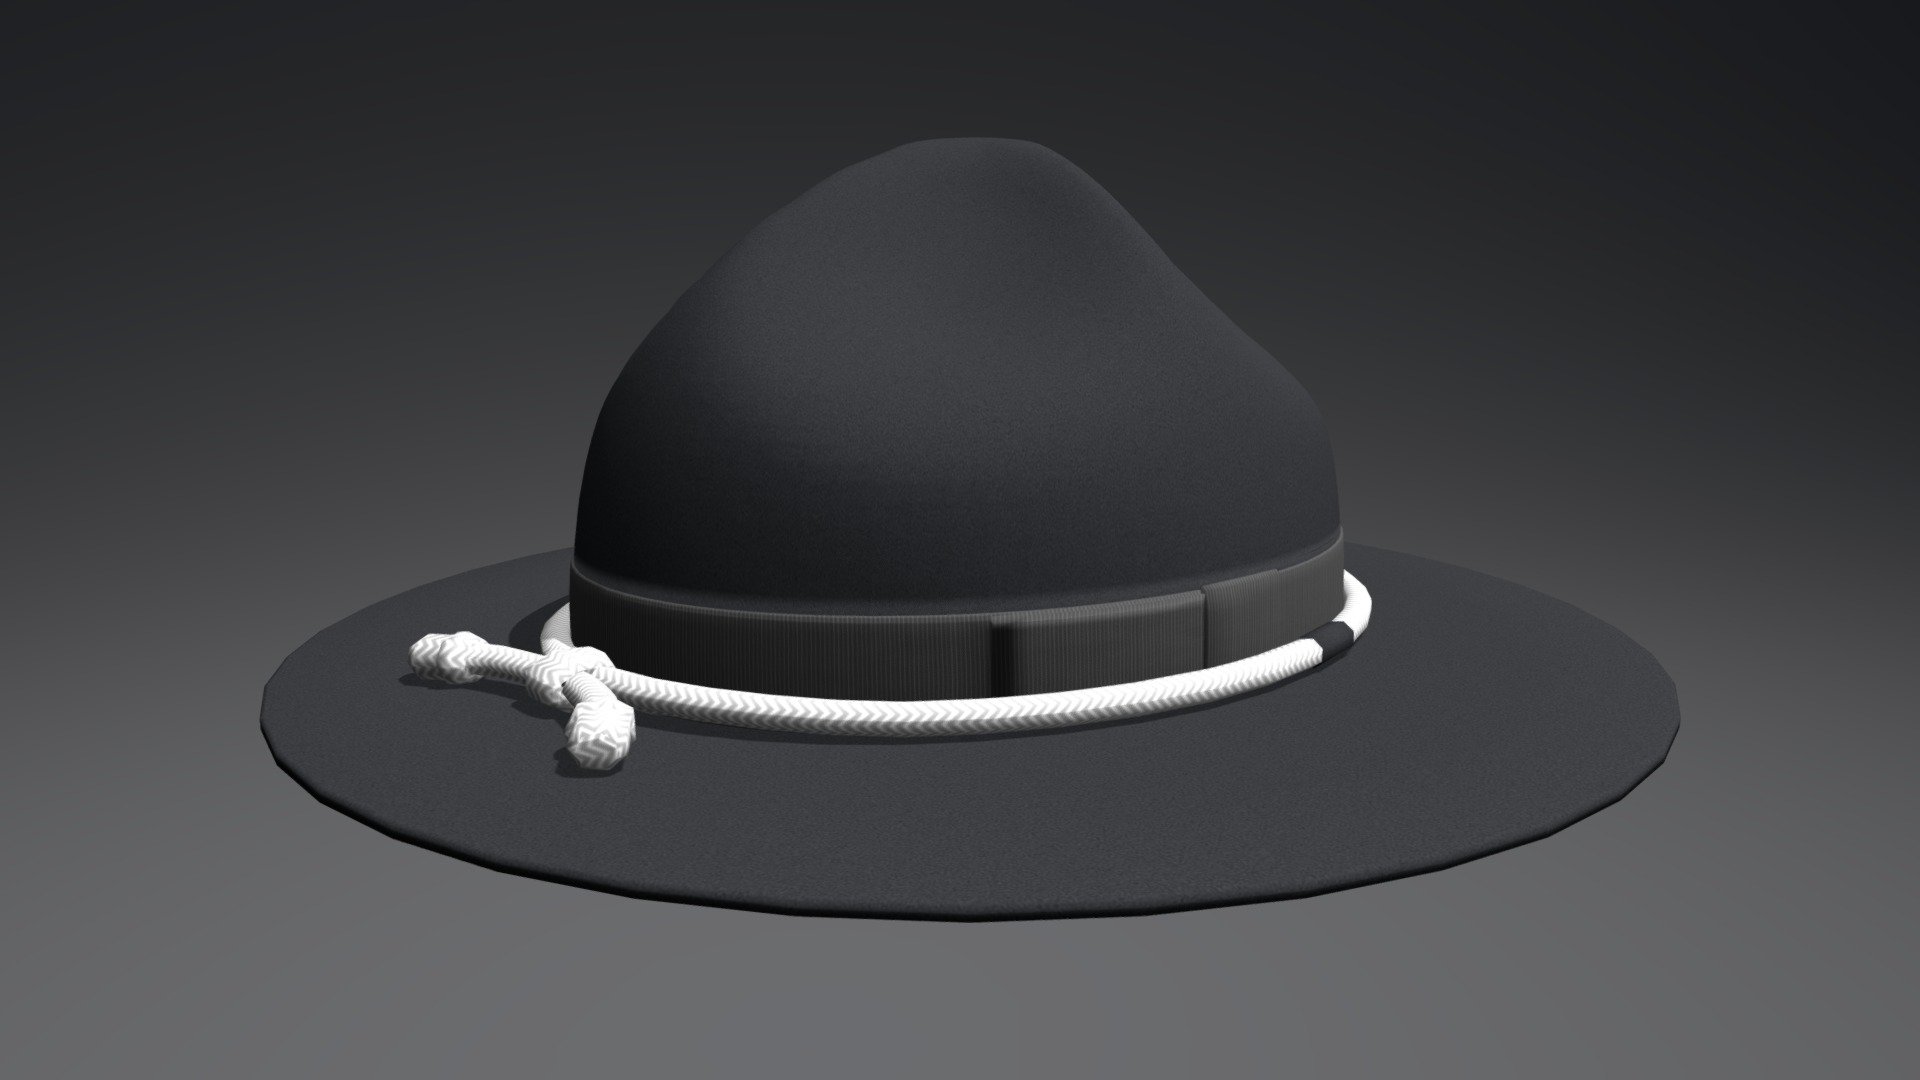 A campaign hat, sometimes called campaign cover, is a broad-brimmed felt or straw hat, with a high crown, pinched symmetrically at the four corners. The hat is most commonly worn as part of a uniform, by such organizations as the Royal Canadian Mounted Police, the New Zealand Army, United States Park Rangers, and Scouts. The campaign hat is occasionally referred to as a Stetson, derived from its origin in the company's Boss of the Plains model in the late 19th century. It should not be confused with the Stetson style cowboy hat, which has a different brim and crease, nor a slouch hat.

*1 model (medium poly) with textures and materials 3d model